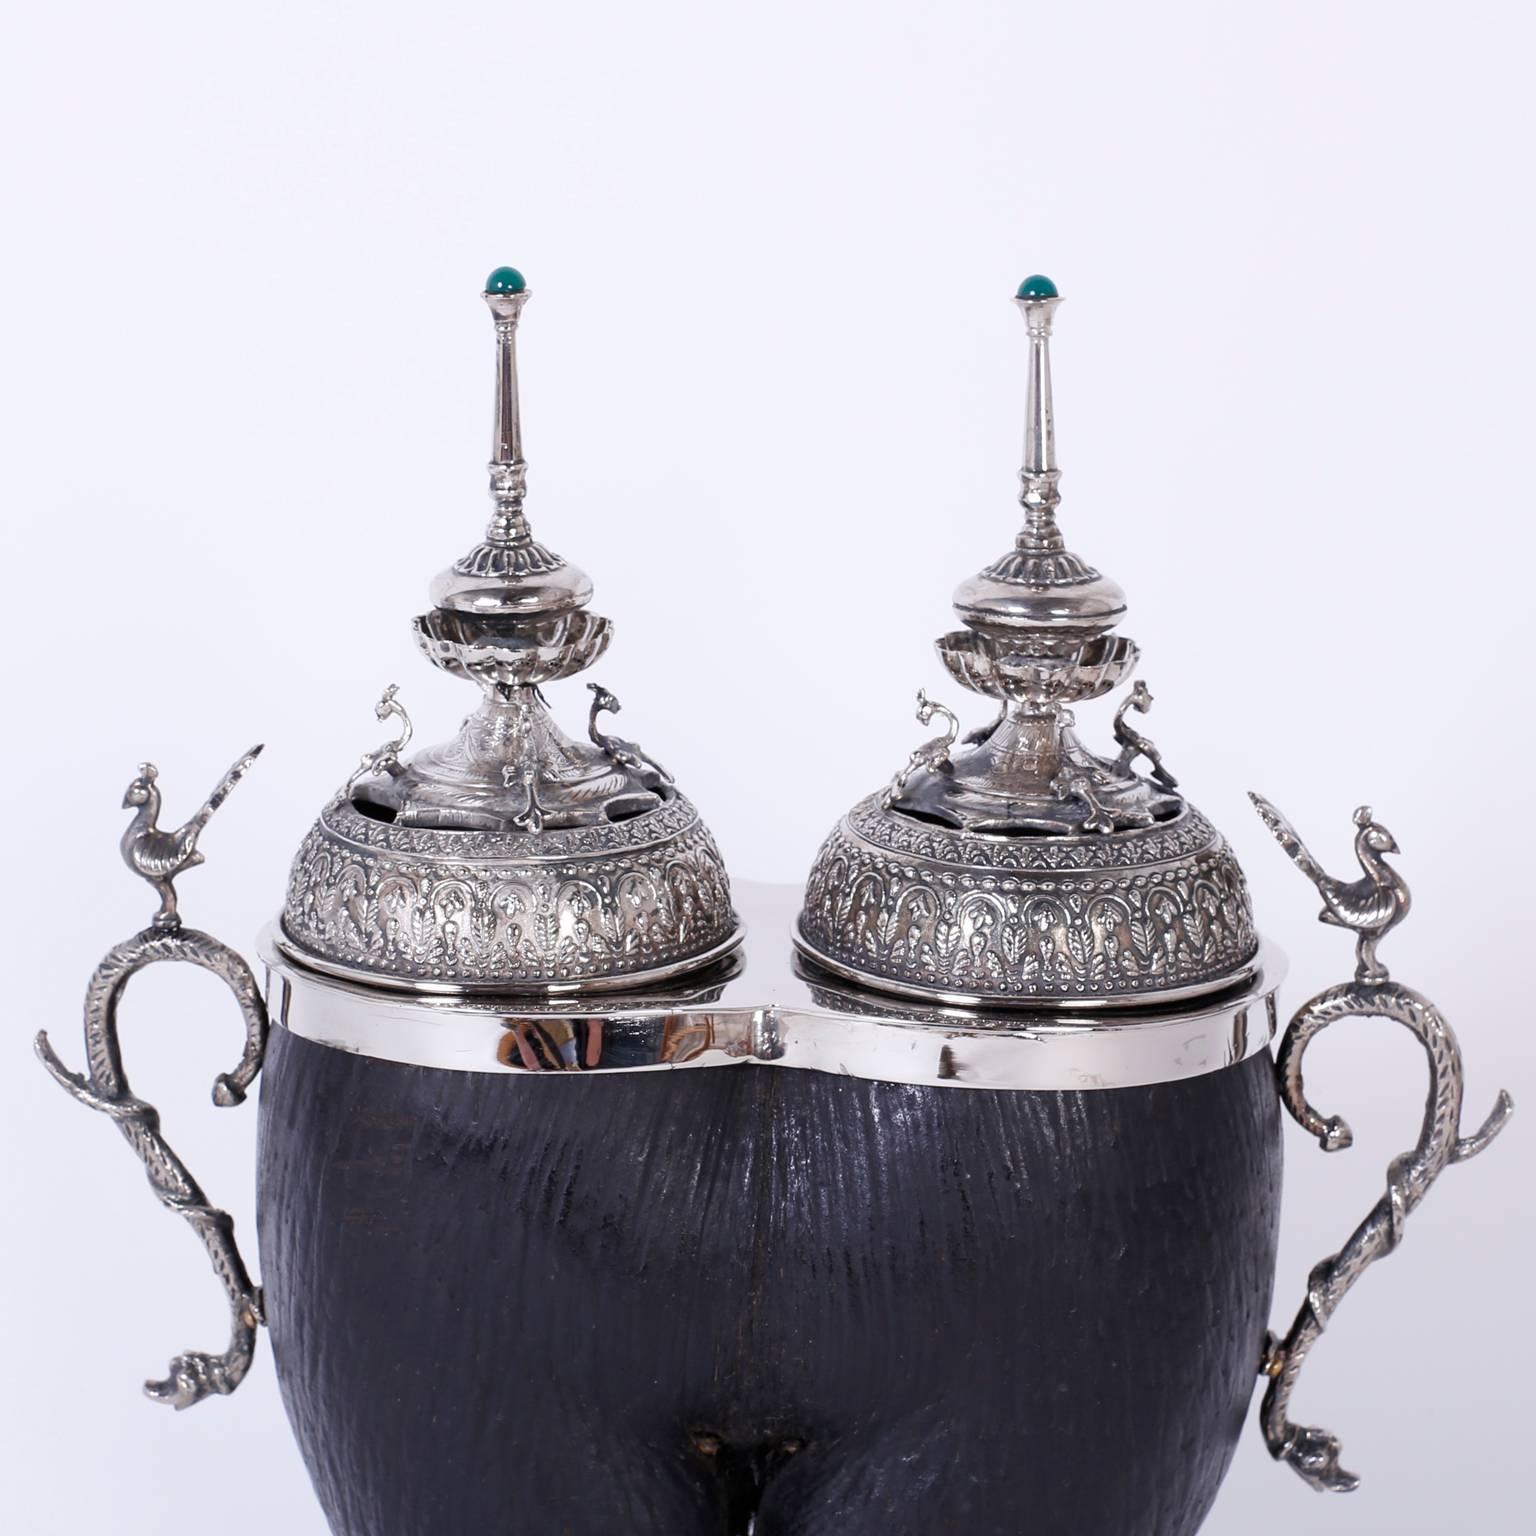 Antique Anglo-Indian tea caddy expertly crafted in India, with a coco de mer
native to the Seychelles islands. Featuring two hand-hammered silvered metal
lids with stone topped finials and silver snake handles with phoenix
birds. The double